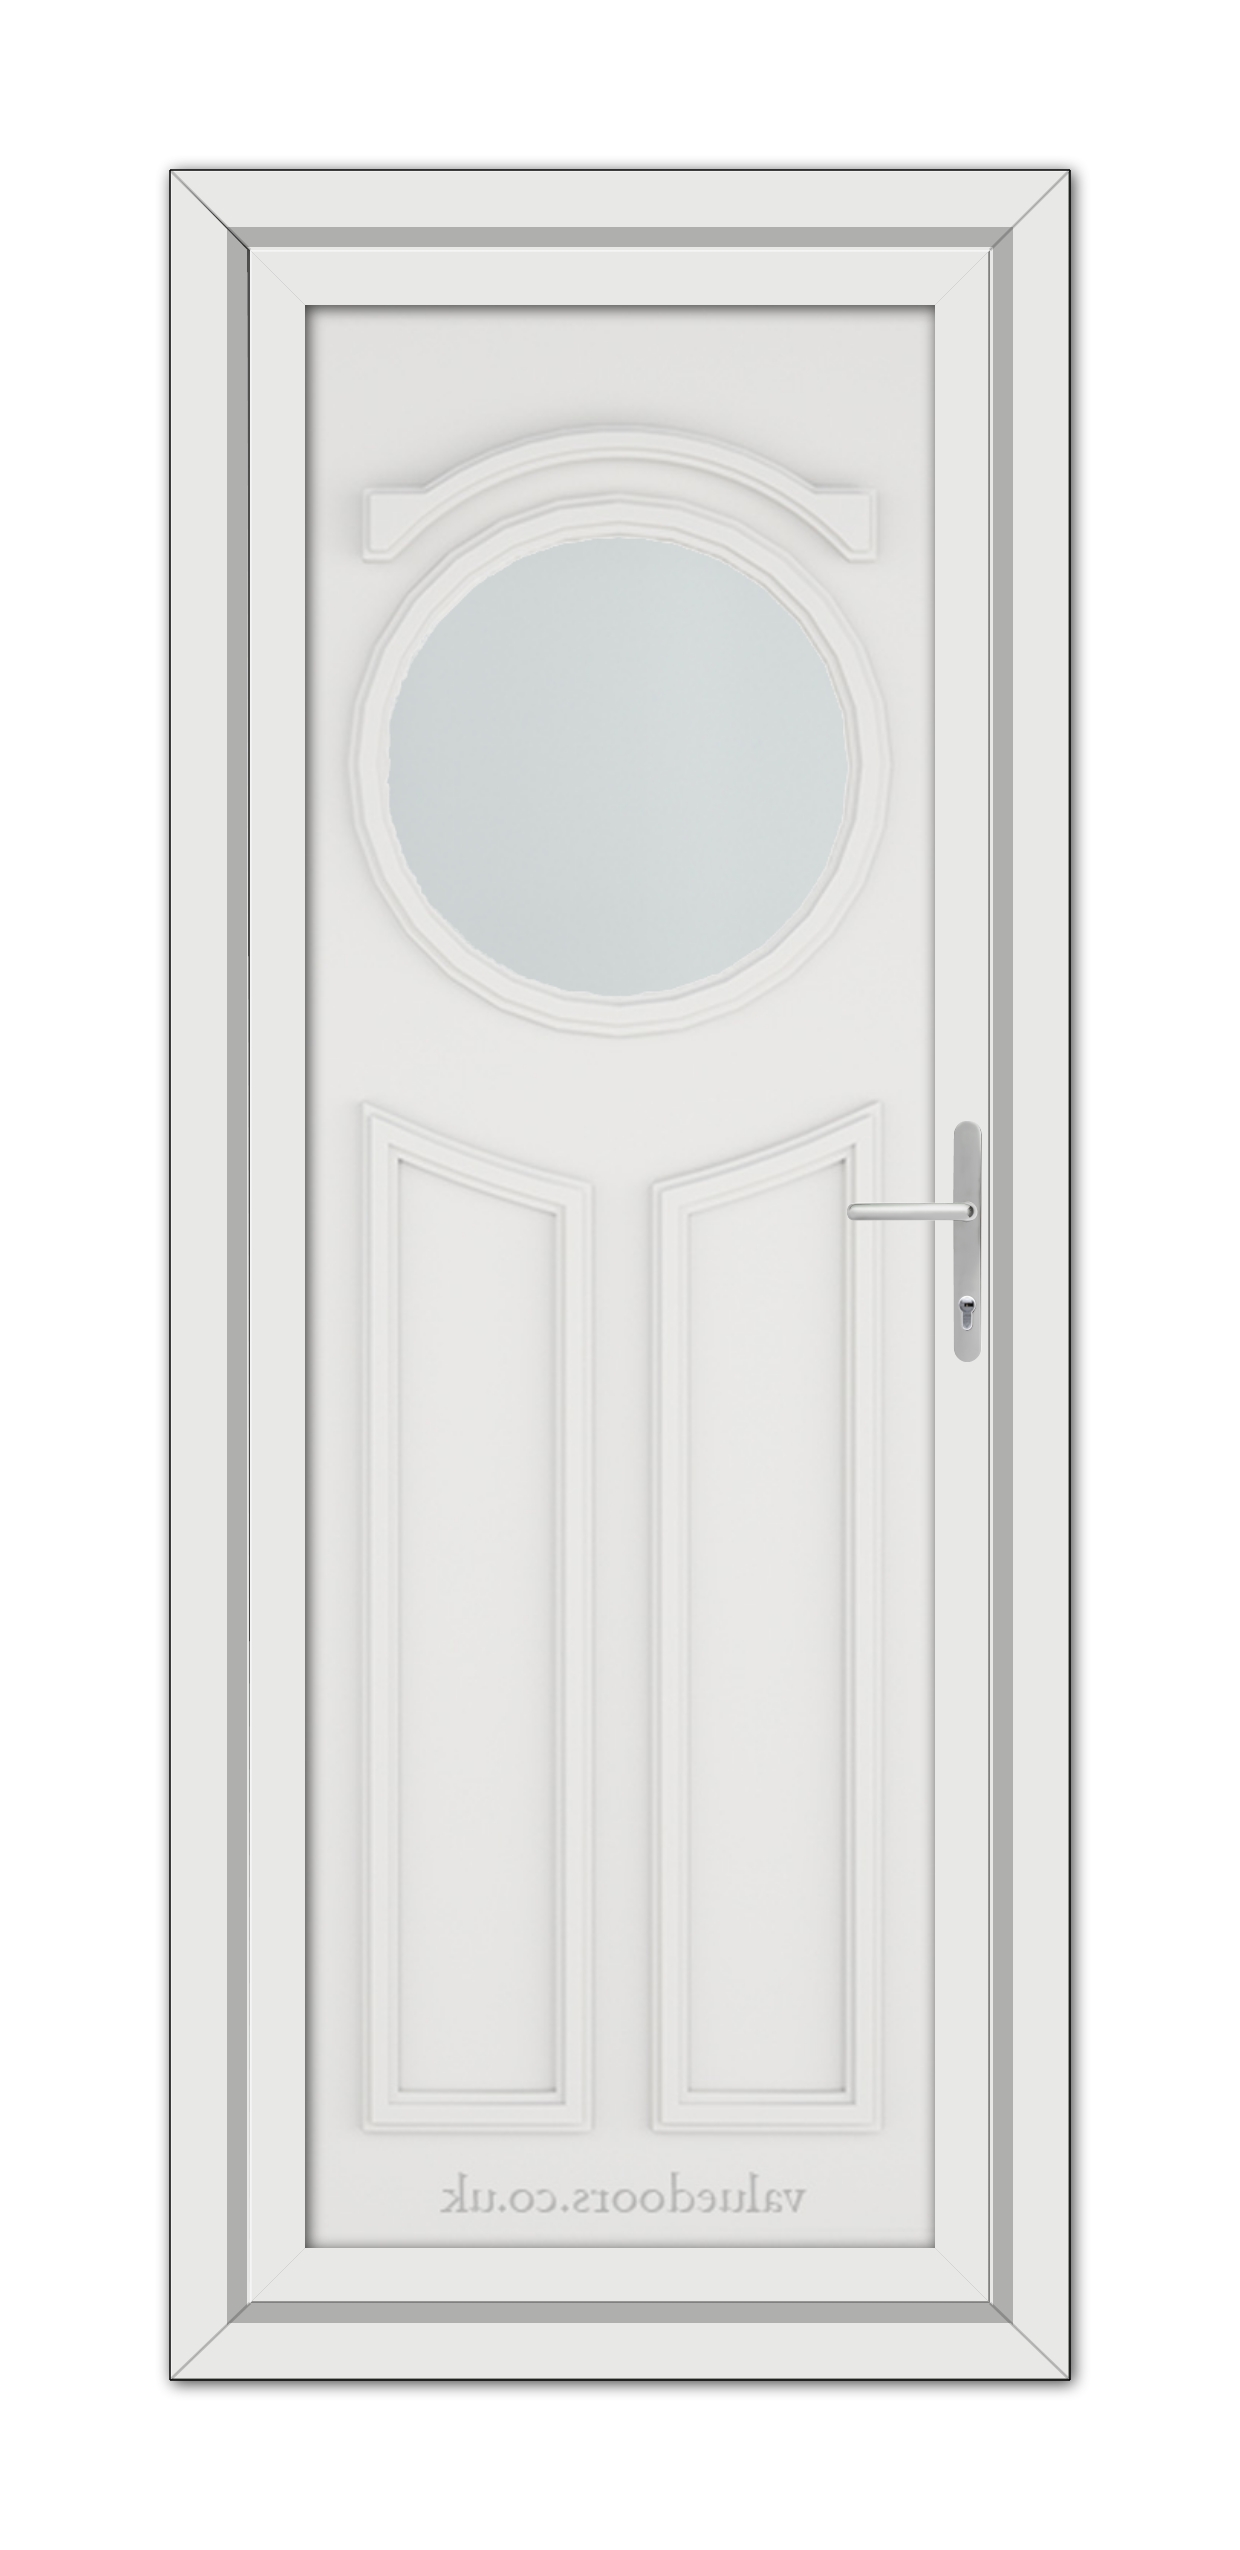 White Blenheim uPVC door featuring an oval glass window at the top, two recessed panels, and a modern handle, set within a simple frame.